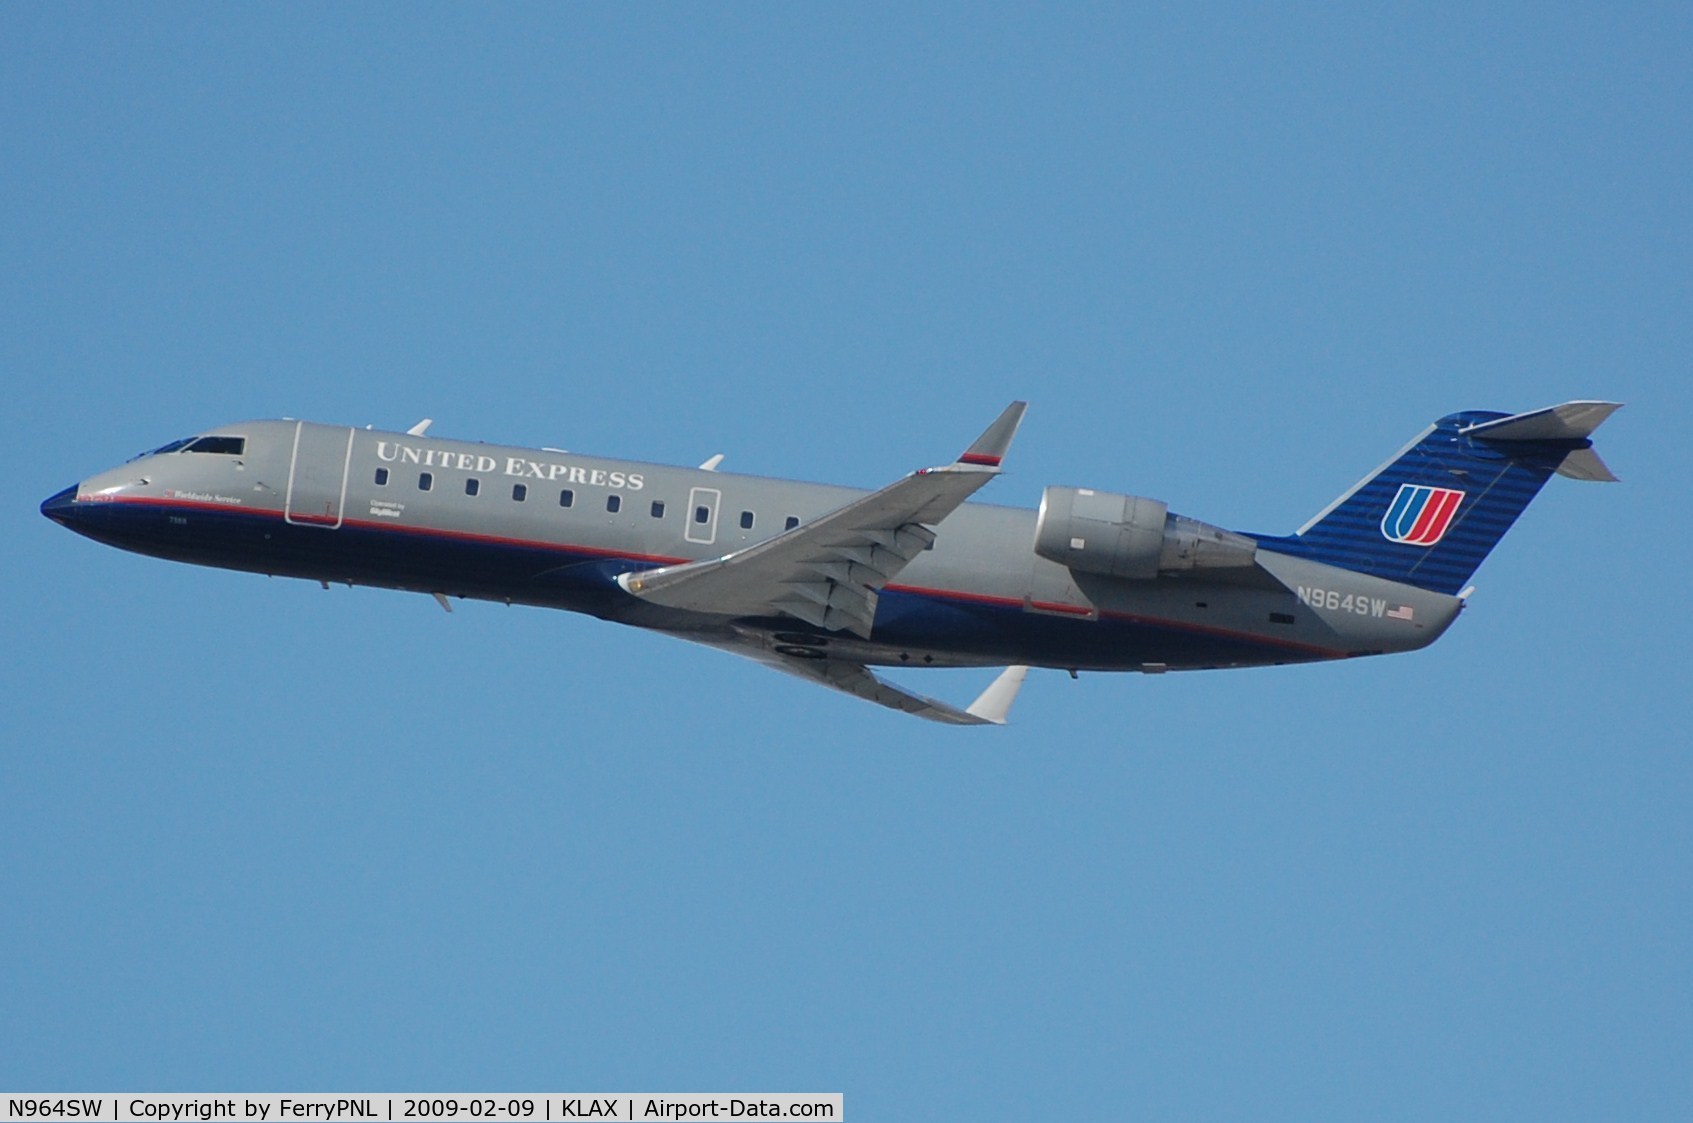 N964SW, 2003 Bombardier CRJ-200ER (CL-600-2B19) C/N 7868, UA Express CL200 departing from LAX